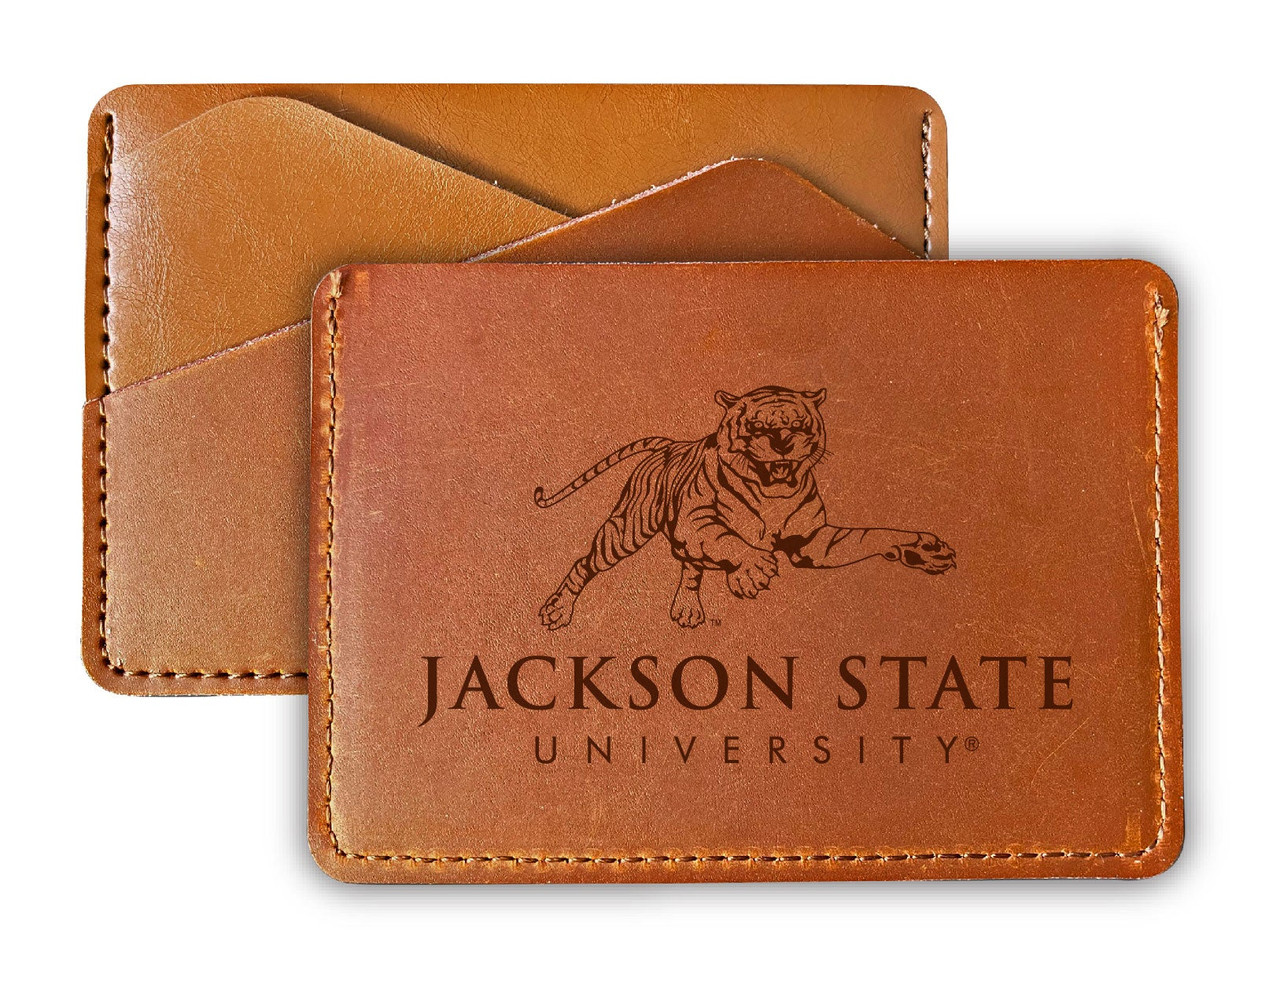 Jackson State University College Leather Card Holder Wallet